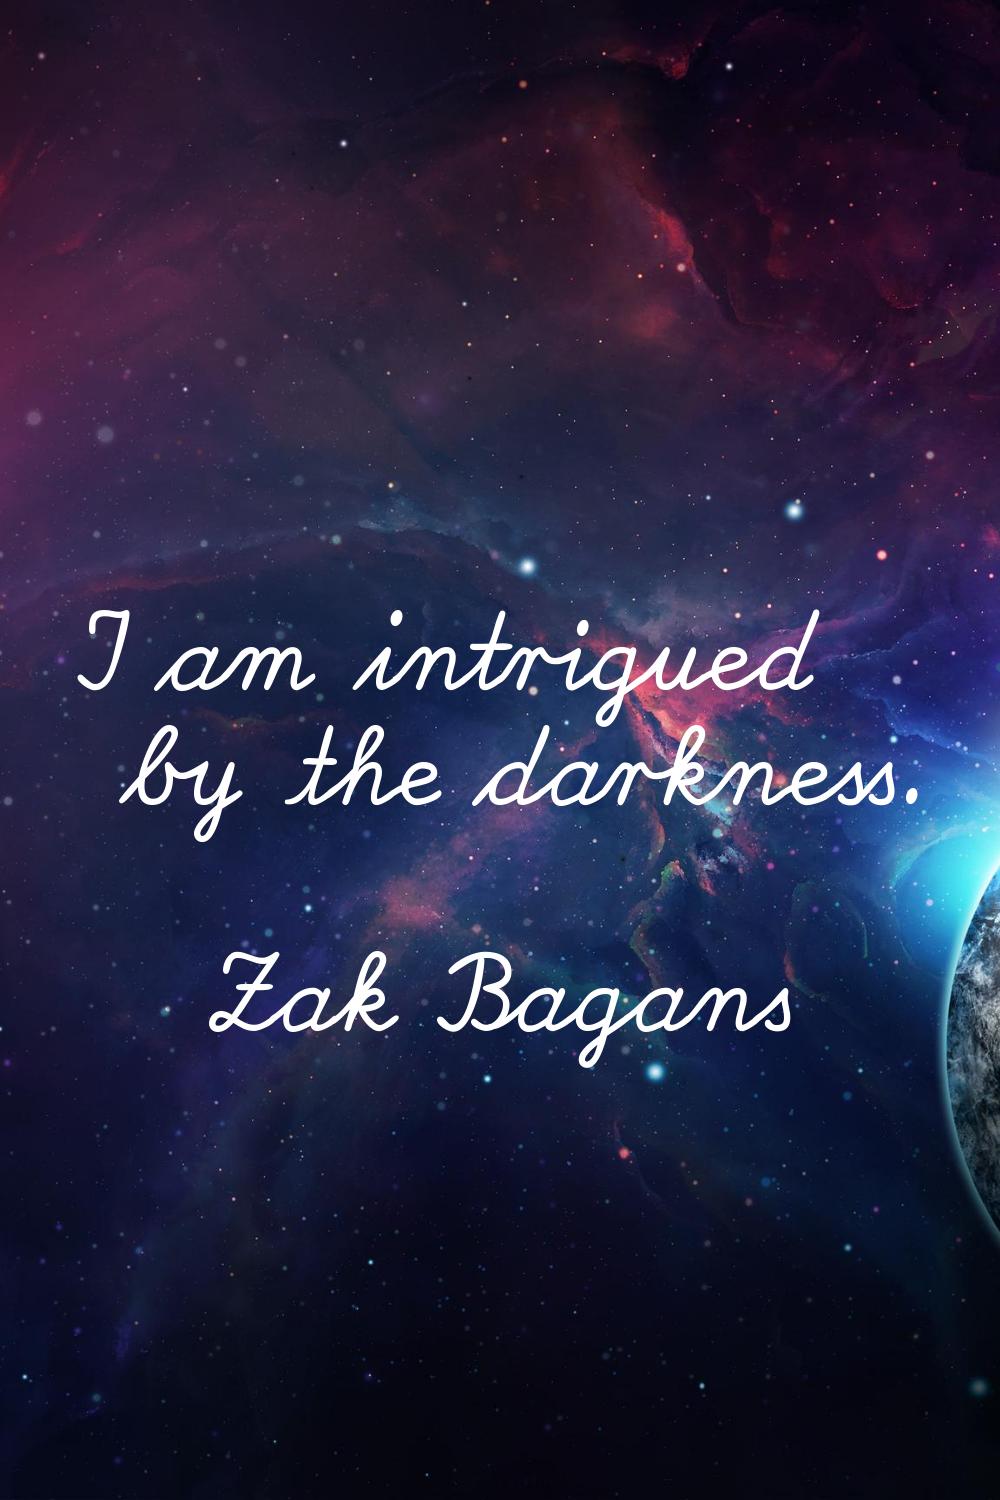 I am intrigued by the darkness.